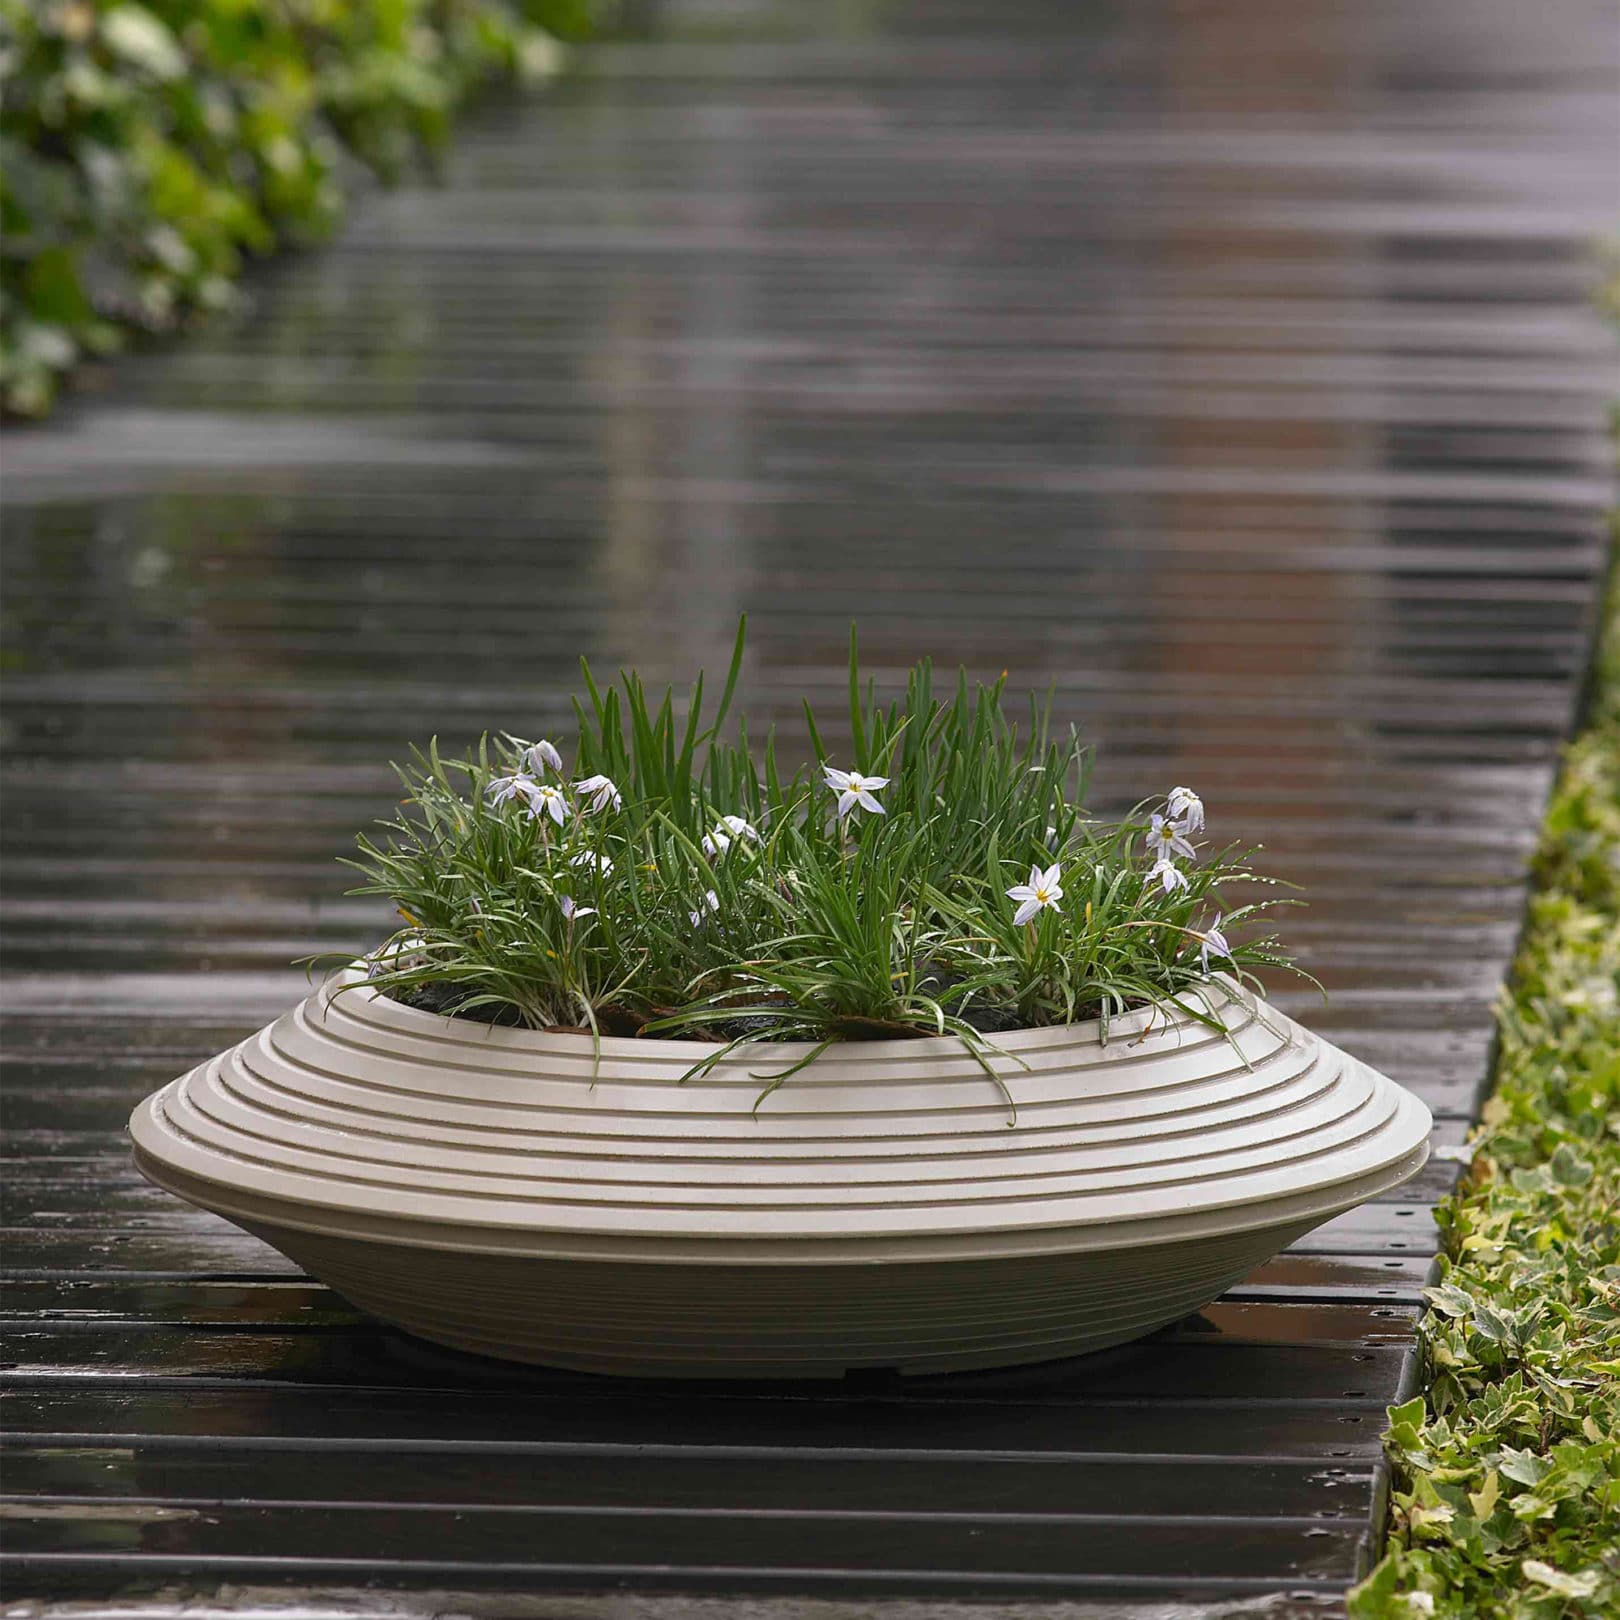 Boardwalk with Potted Daniel Bowl in Weathered Stone